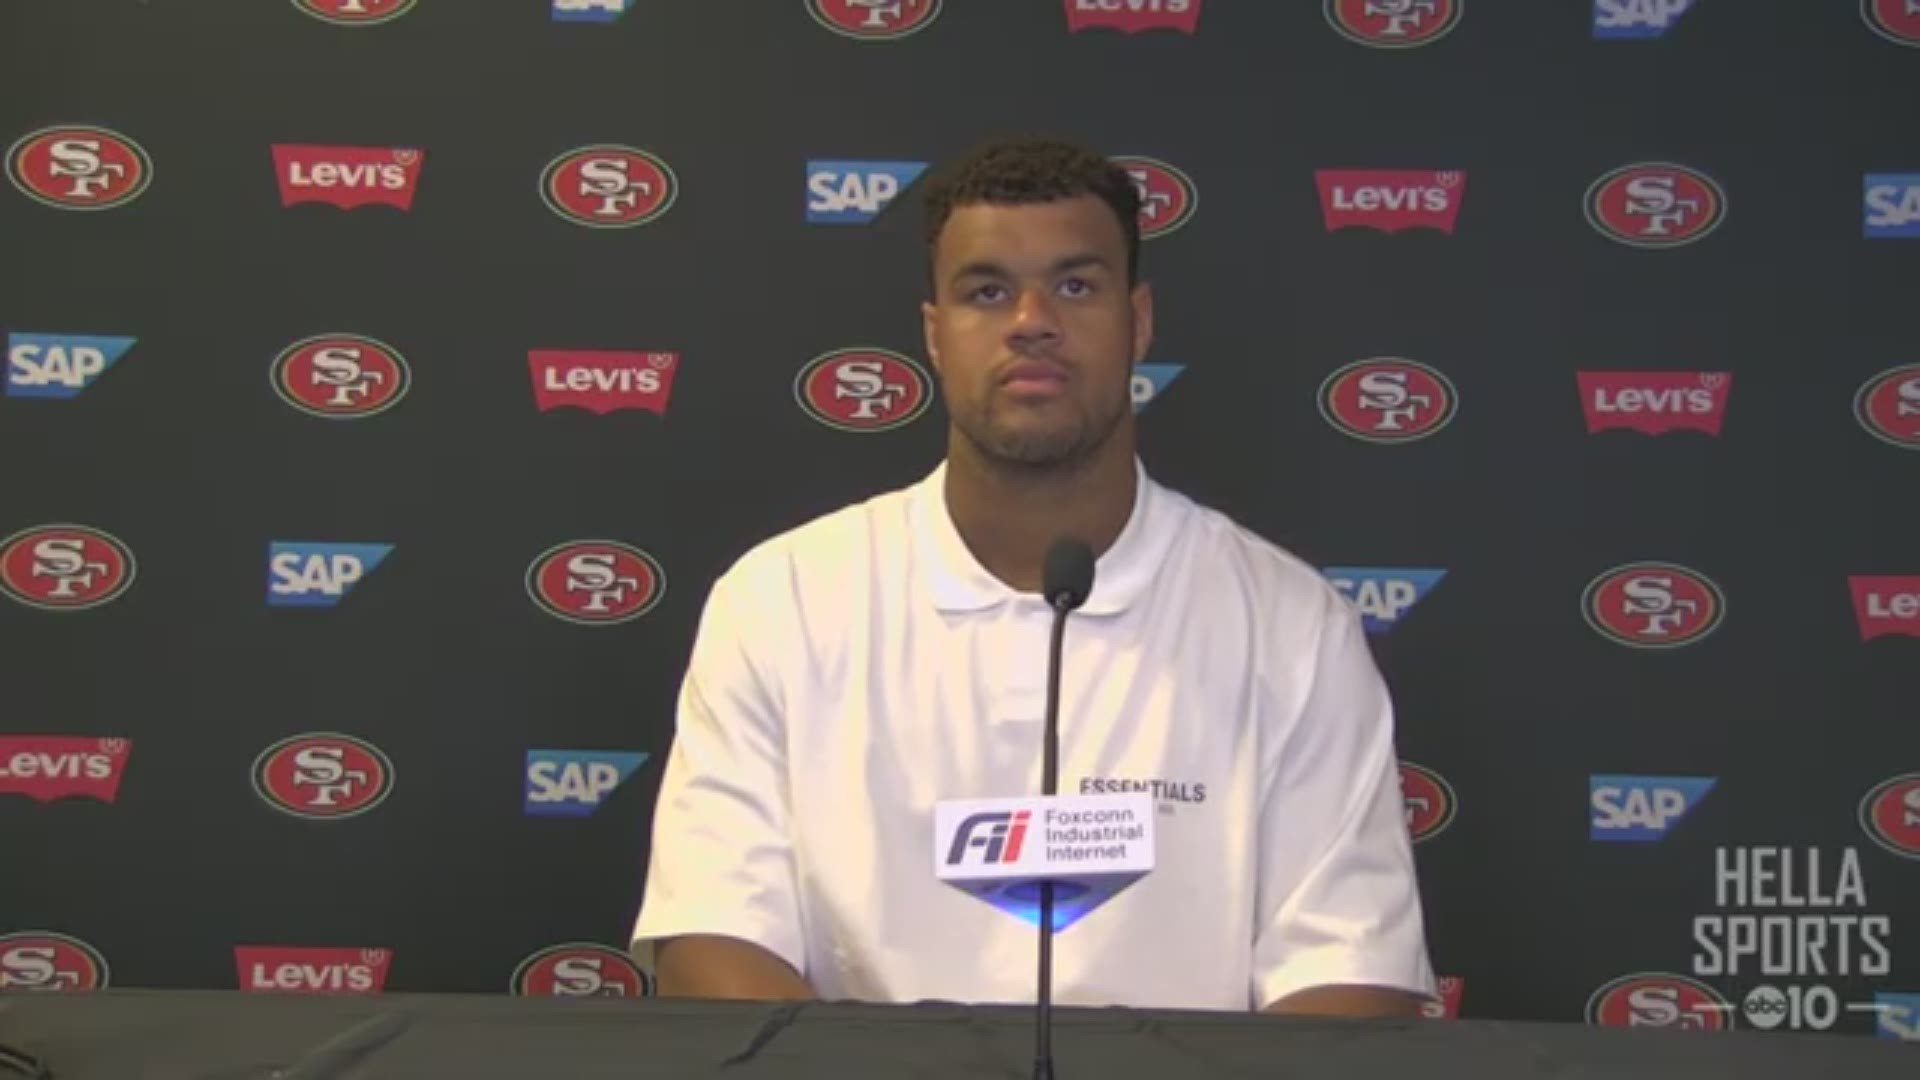 49ers DE Arik Armstead talks to the media following week two's 31-13 victory over the New York Jets about the injuries to fellow linemen Nick Bosa & Soloman Thomas.